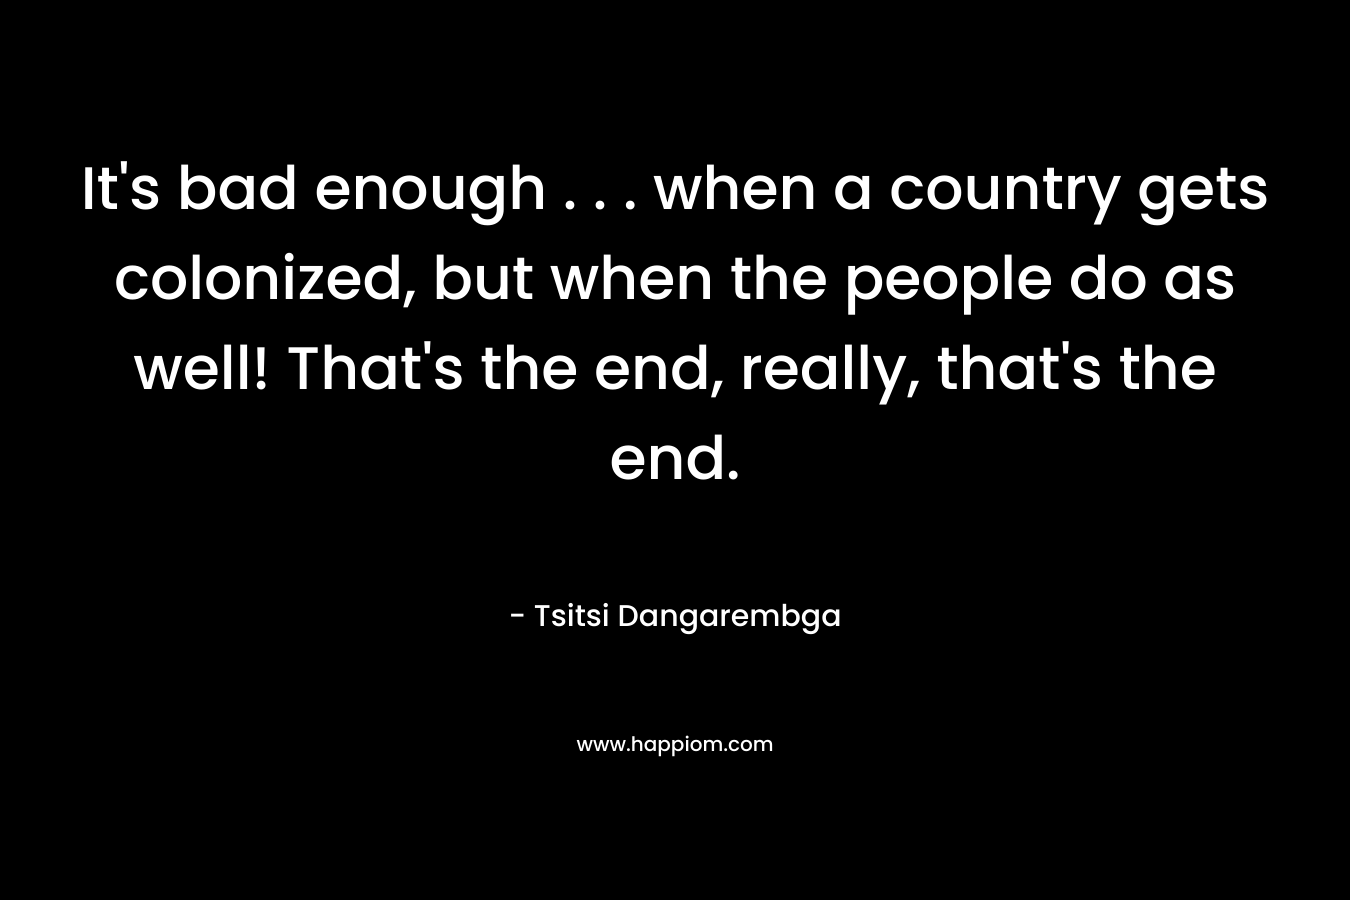 It's bad enough . . . when a country gets colonized, but when the people do as well! That's the end, really, that's the end.